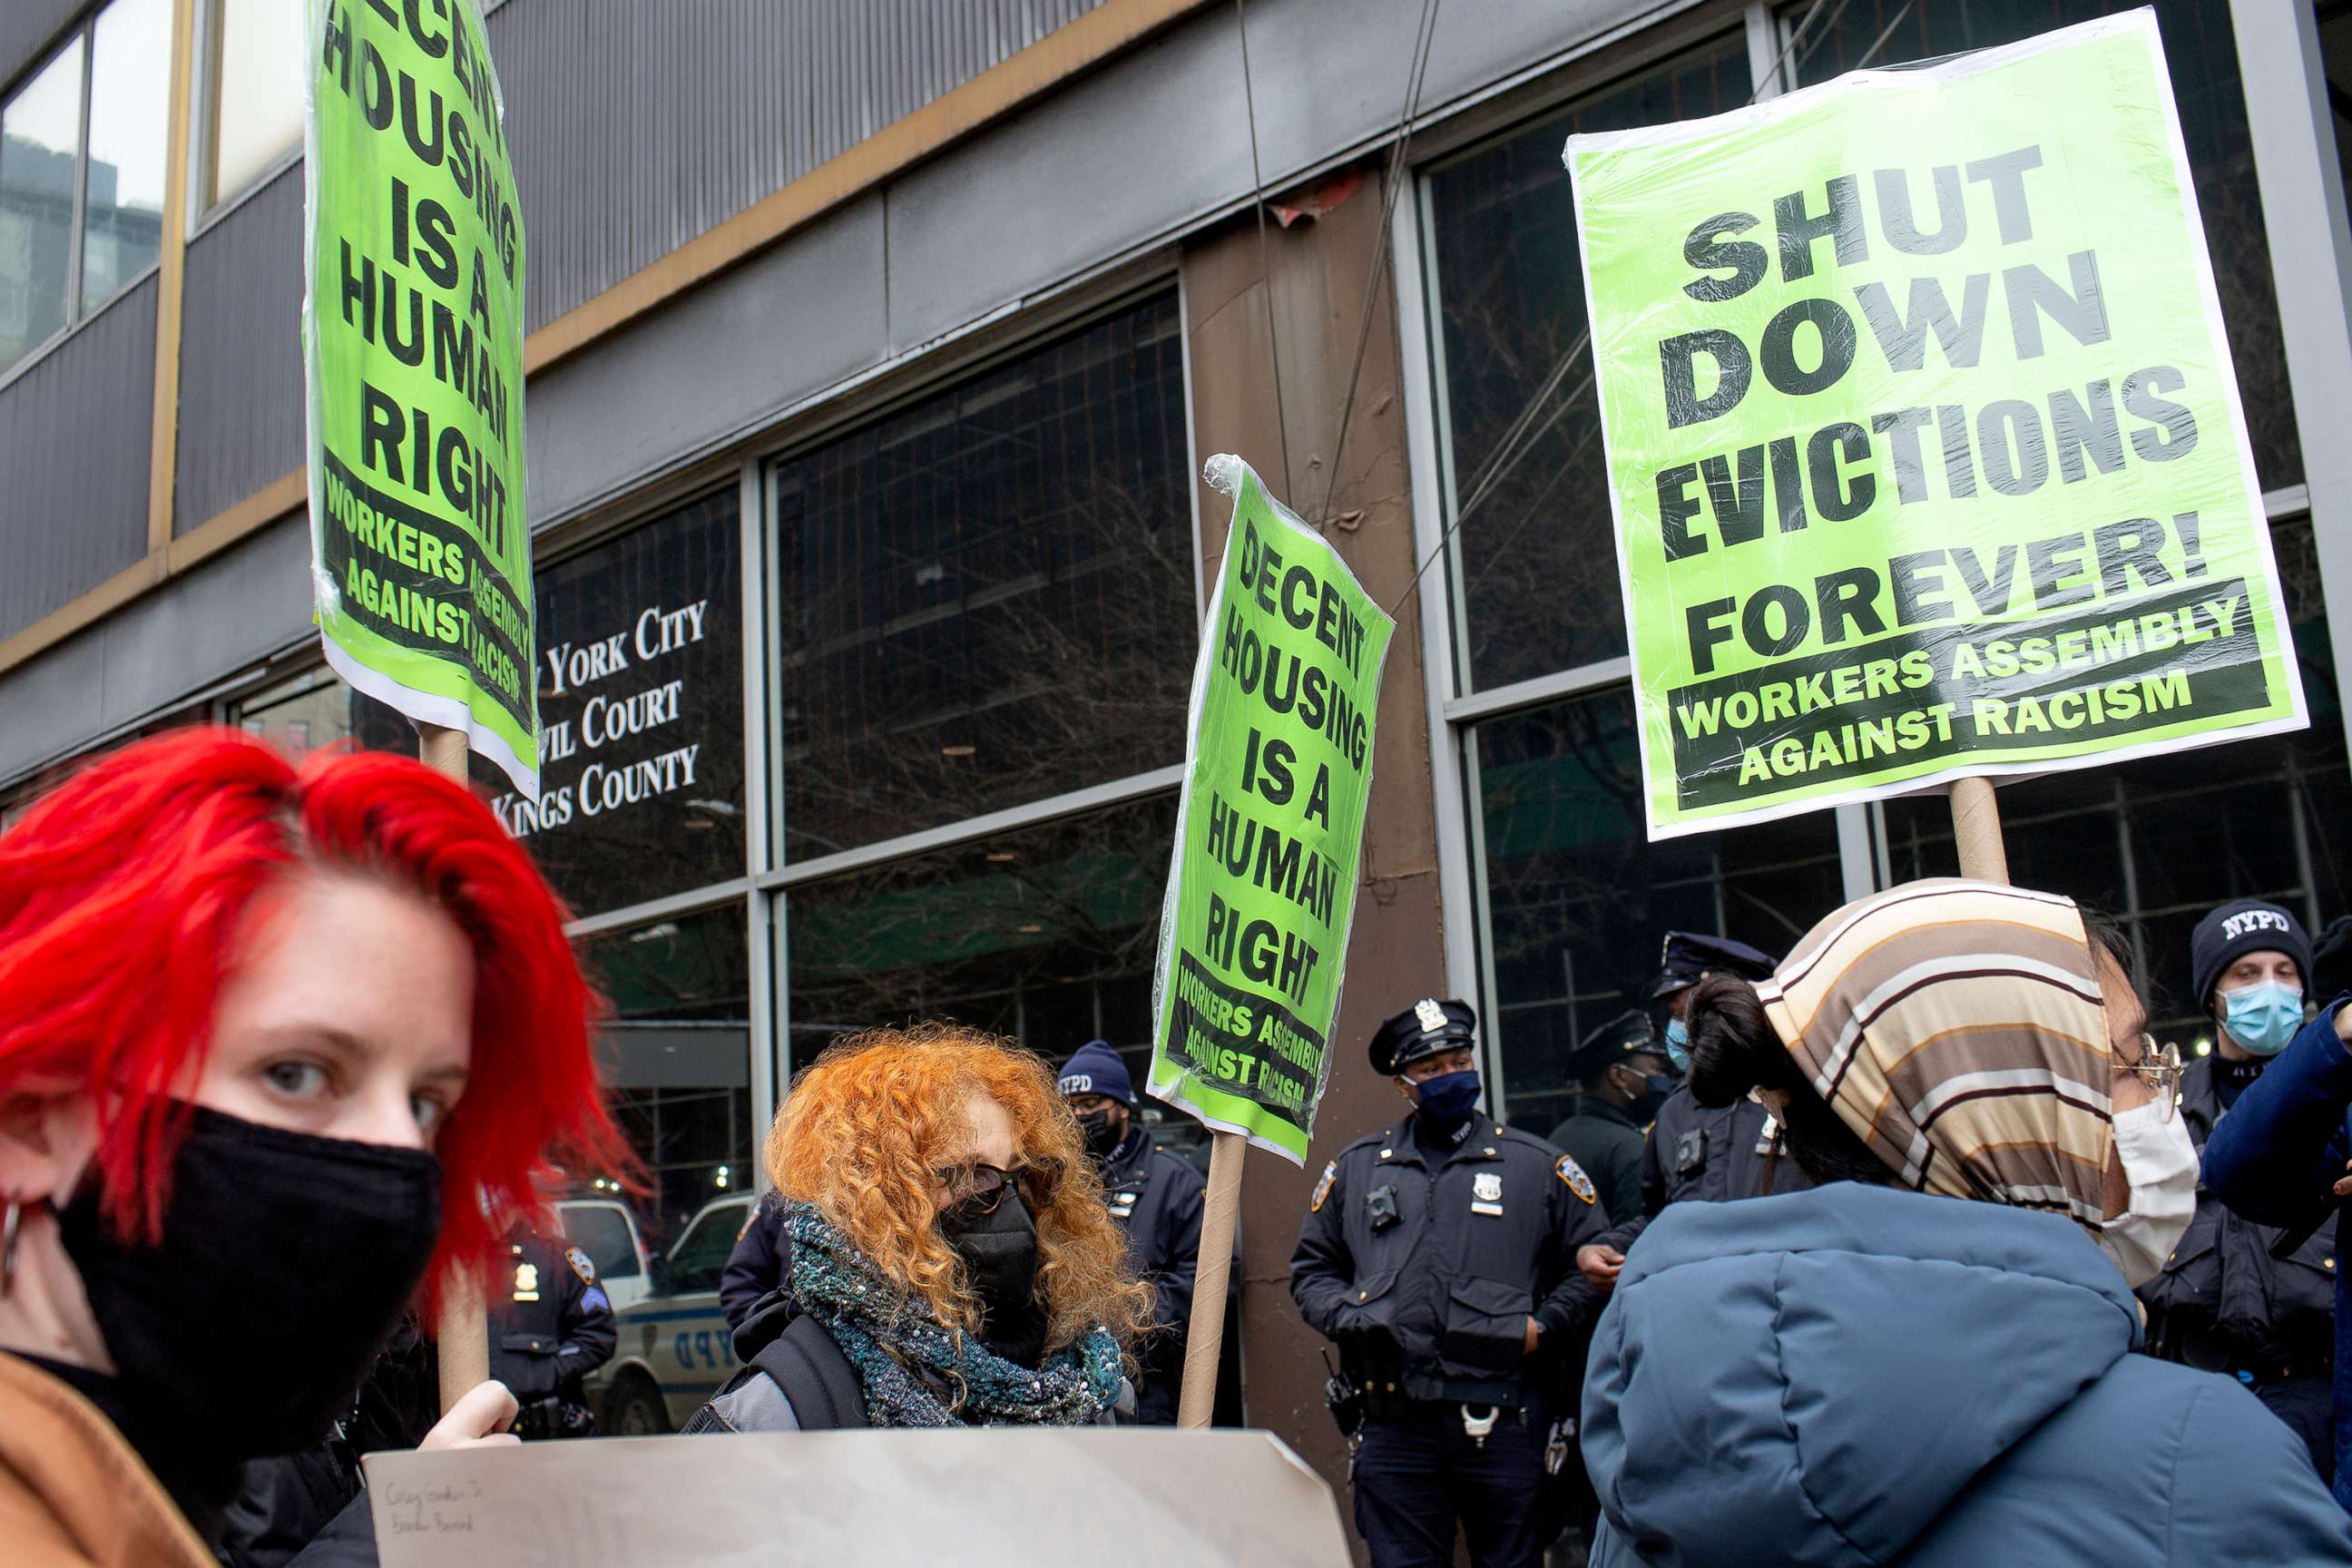 PHOTO: On the day that New York State's COVID-19 moratorium on rent expires, tenant rights activists hold a demonstration outside Civil Court in Brooklyn, New York, March 1, 2021.